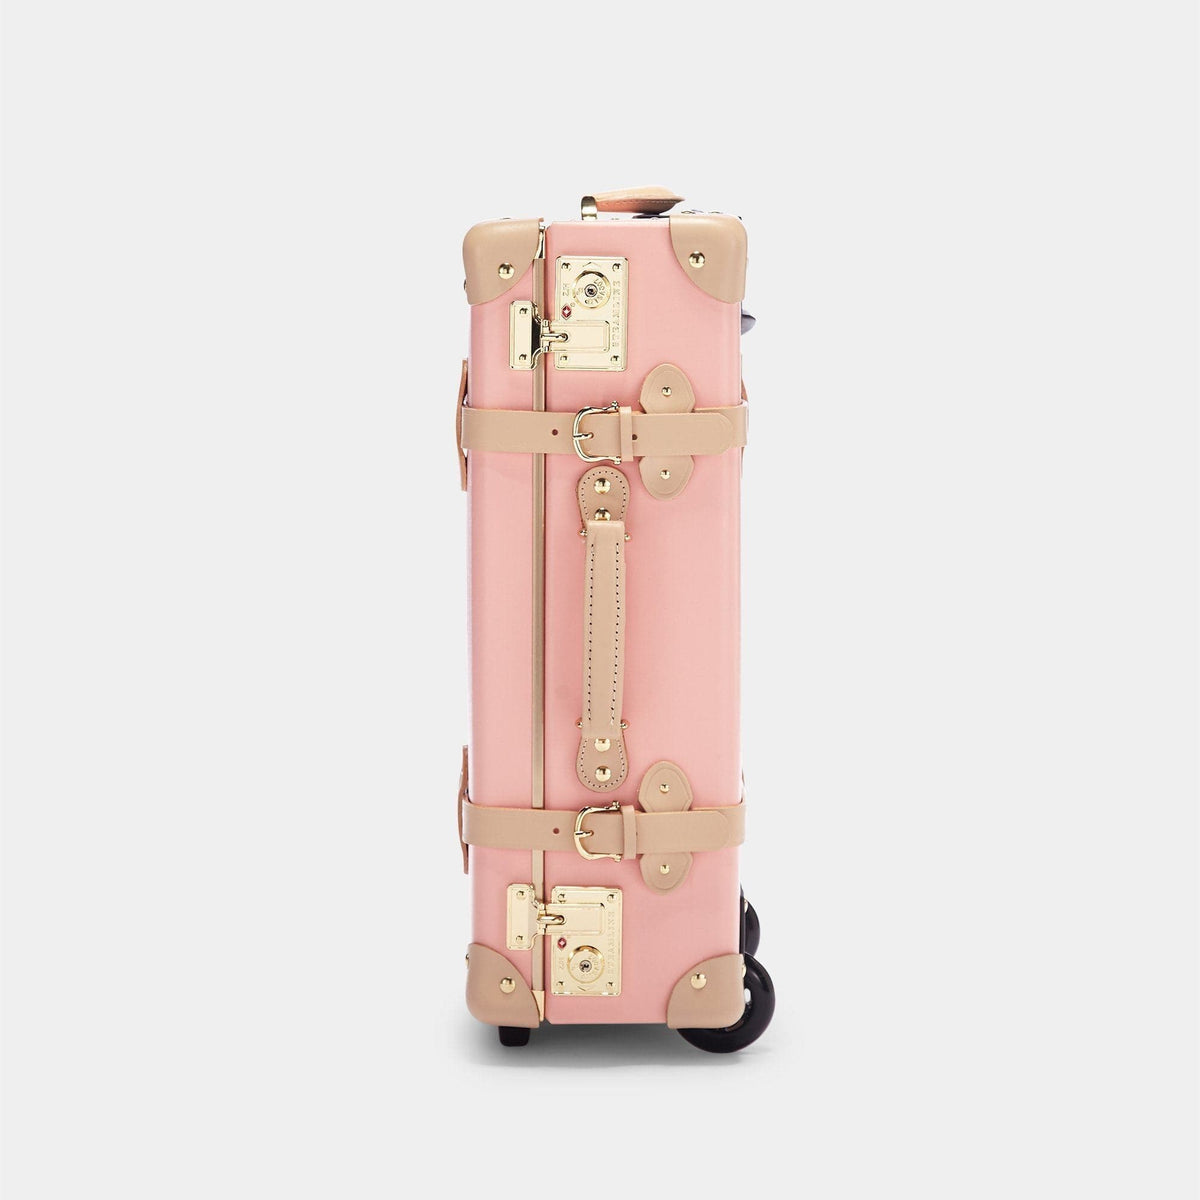 The Correspondent - Pink Carryon Carryon Steamline Luggage 